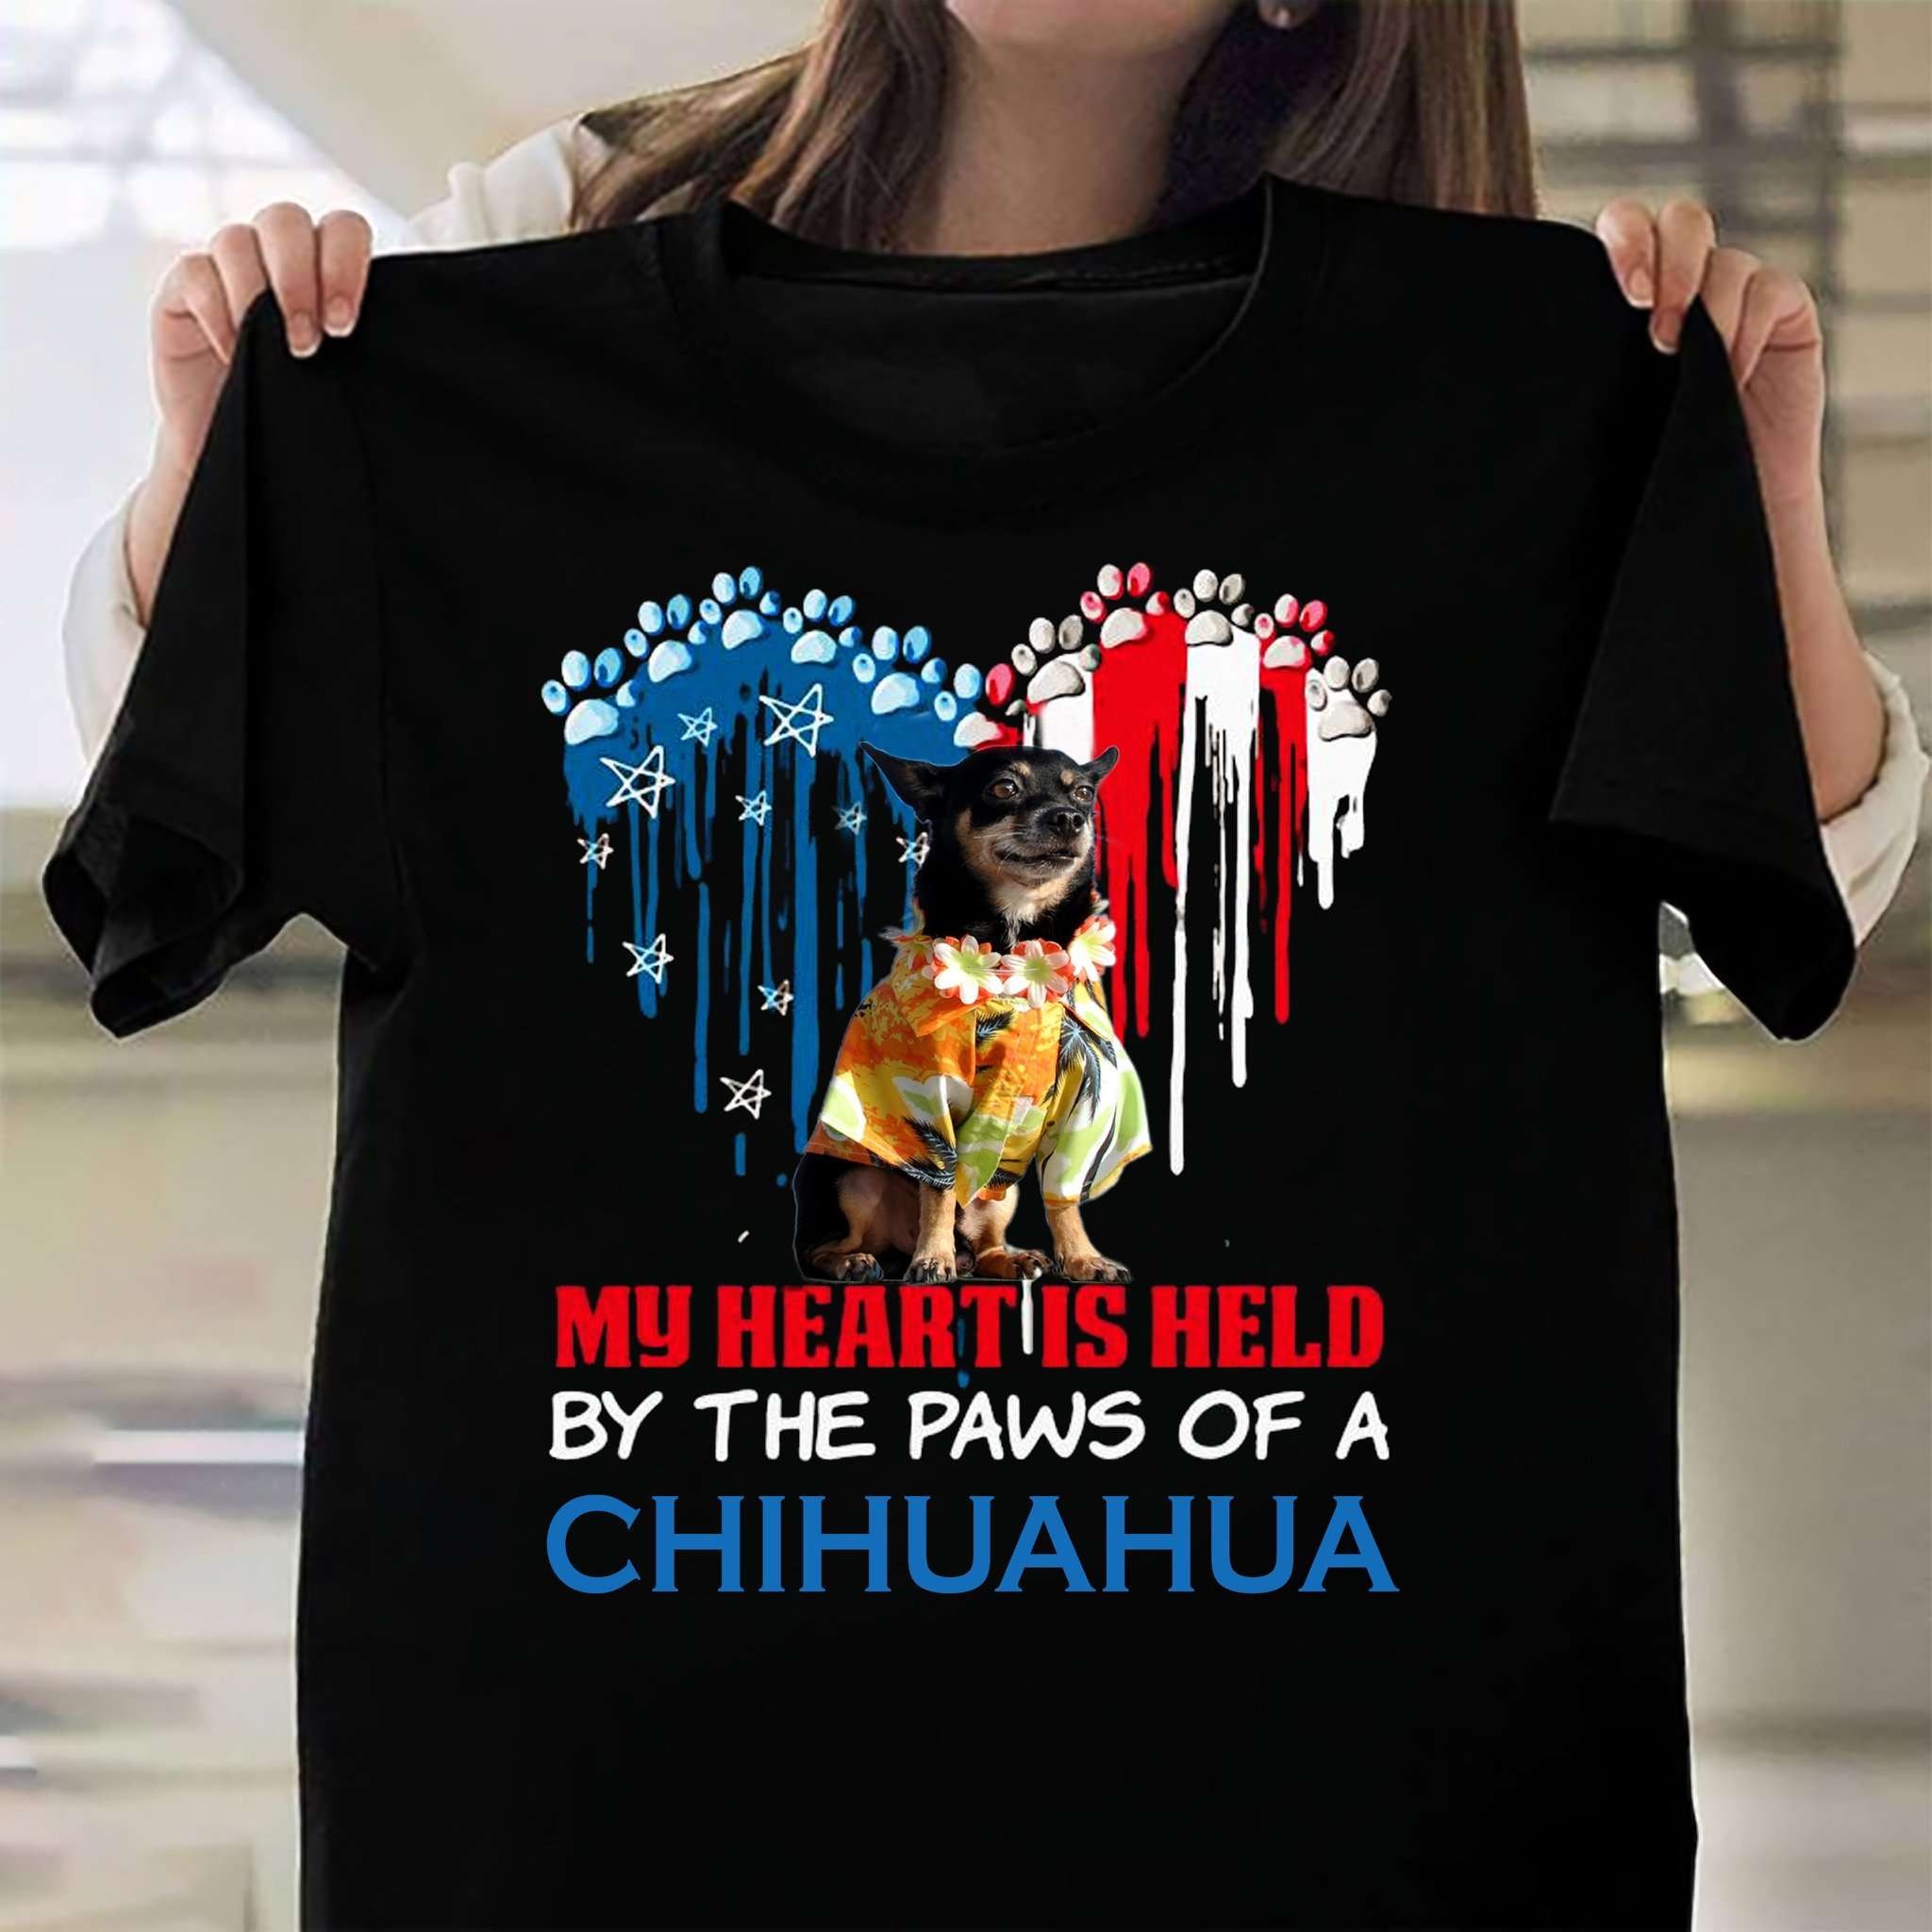 My heart is held by the paws of a Chihuahua - American loves Chihuahua, Chihuahua dog paws